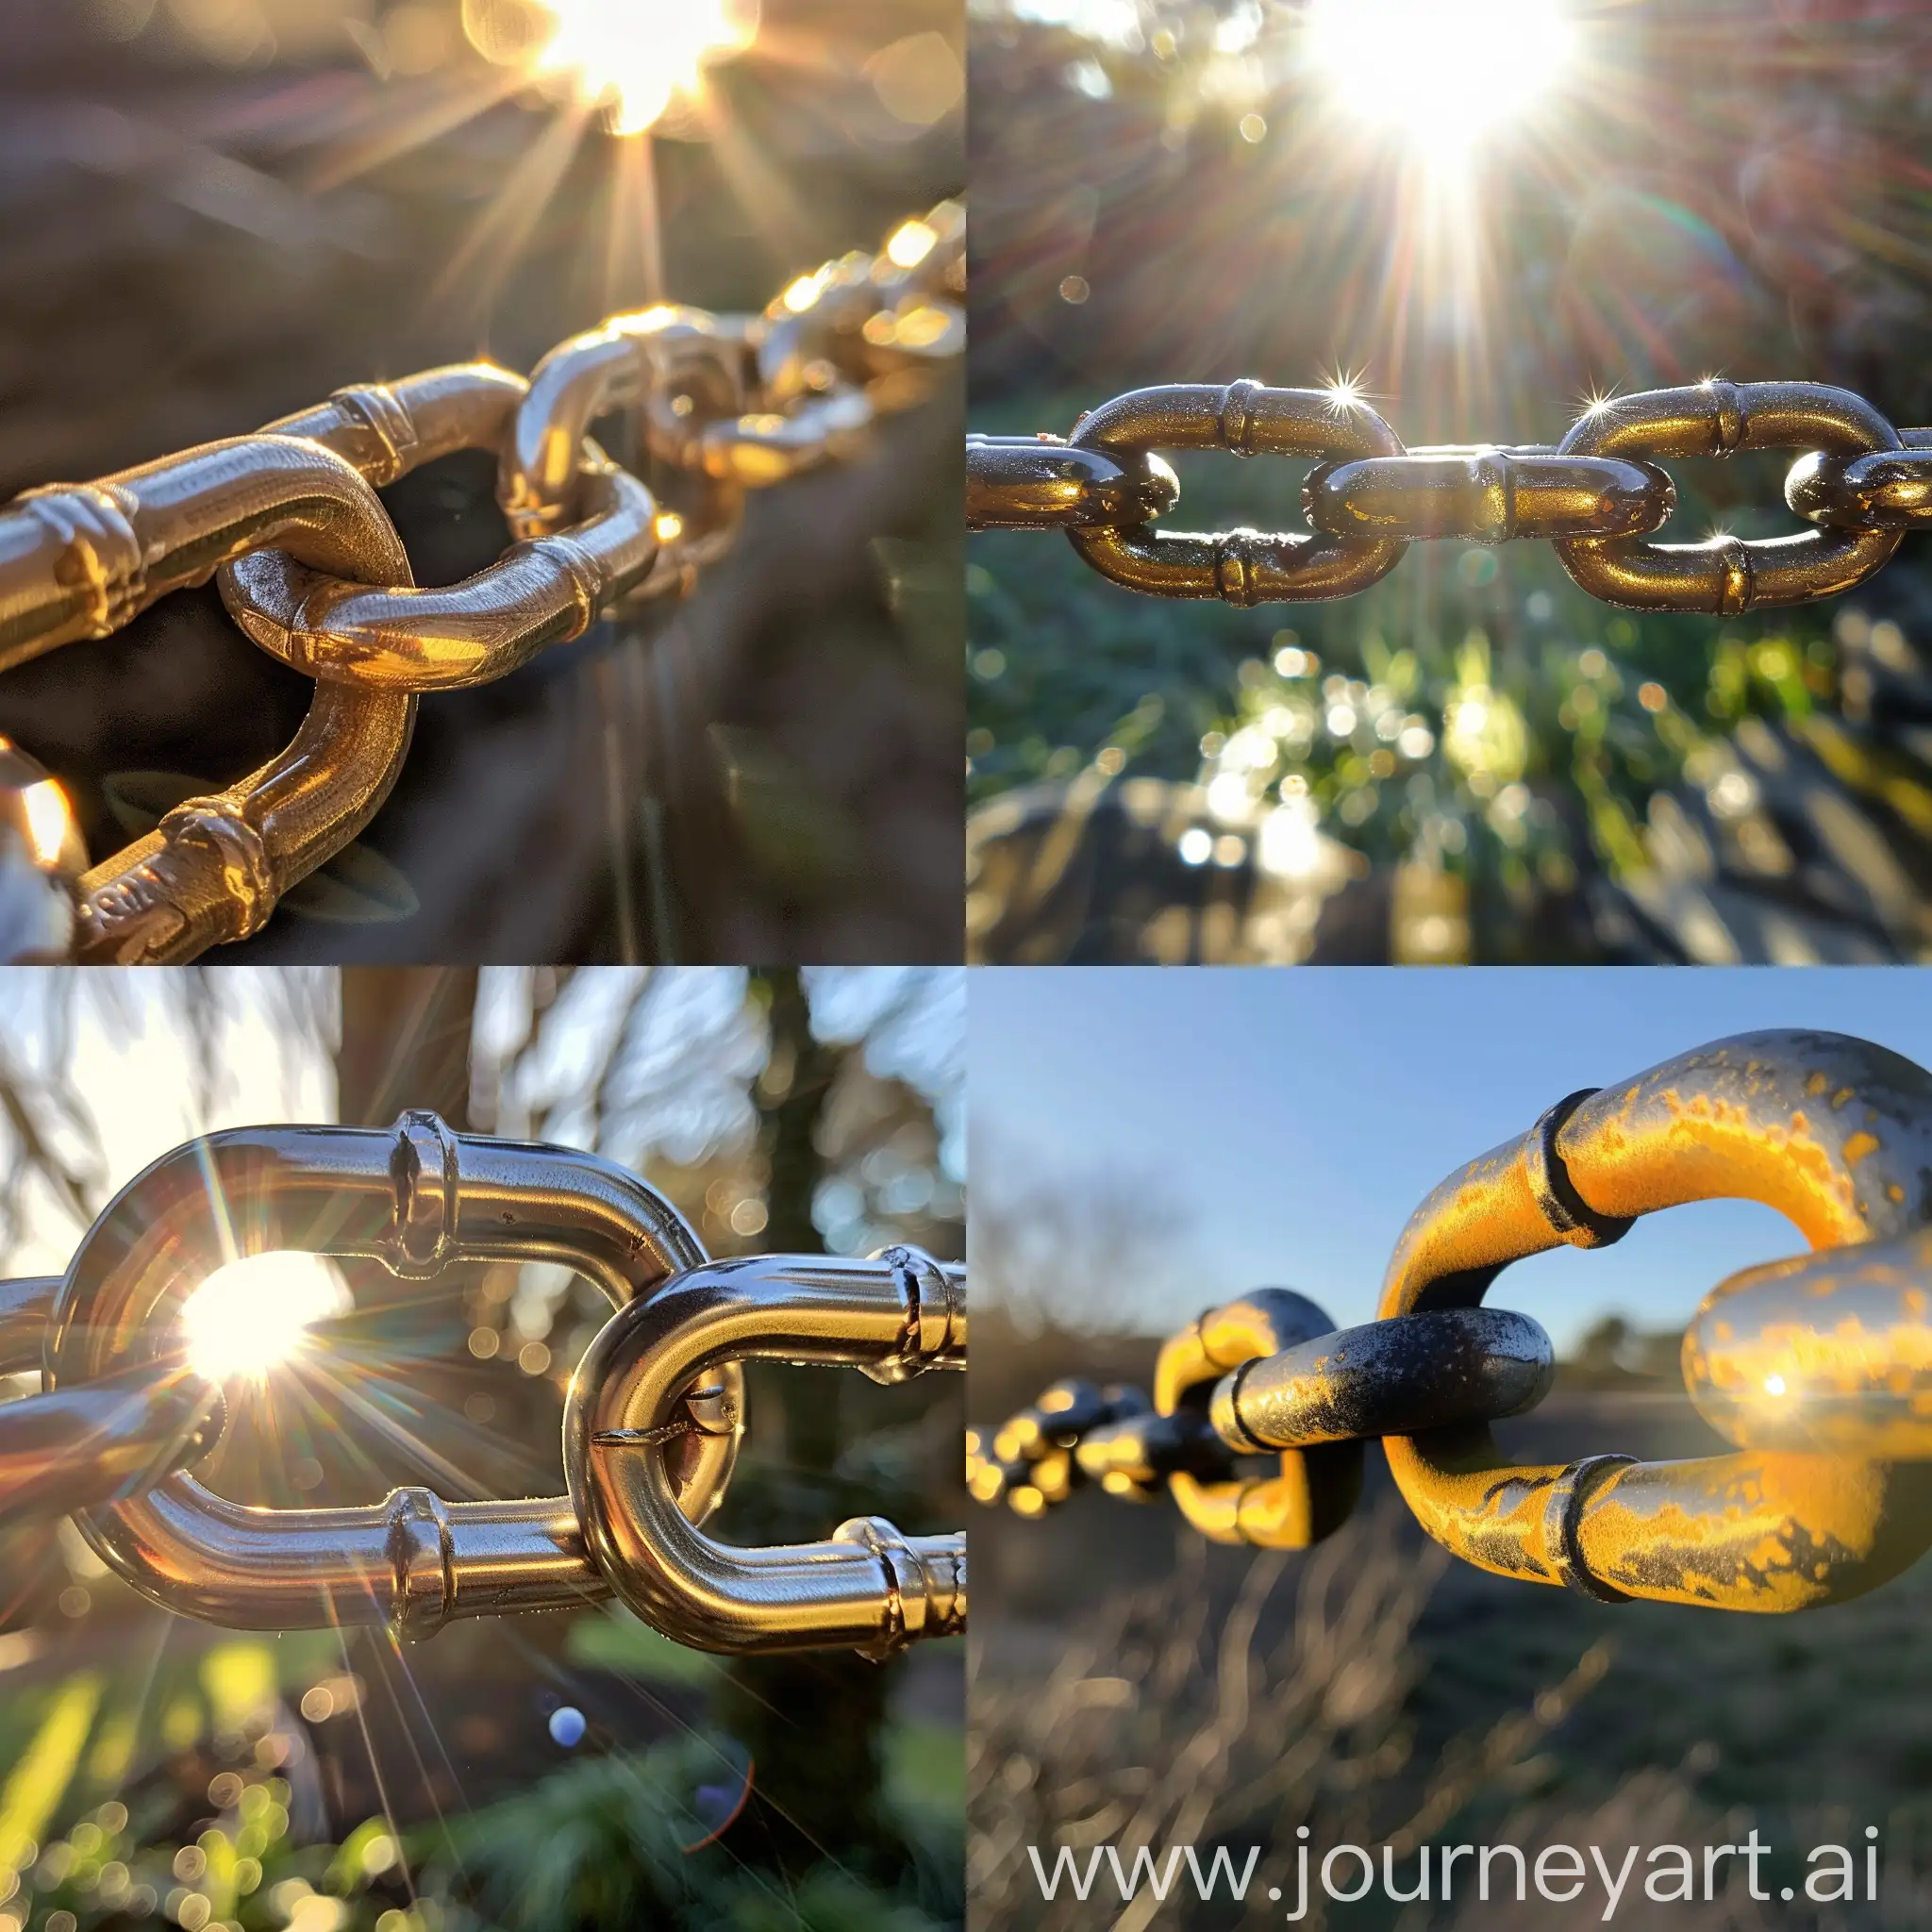 Joyful-Sunshine-Smiles-Linked-in-Interconnected-Chains